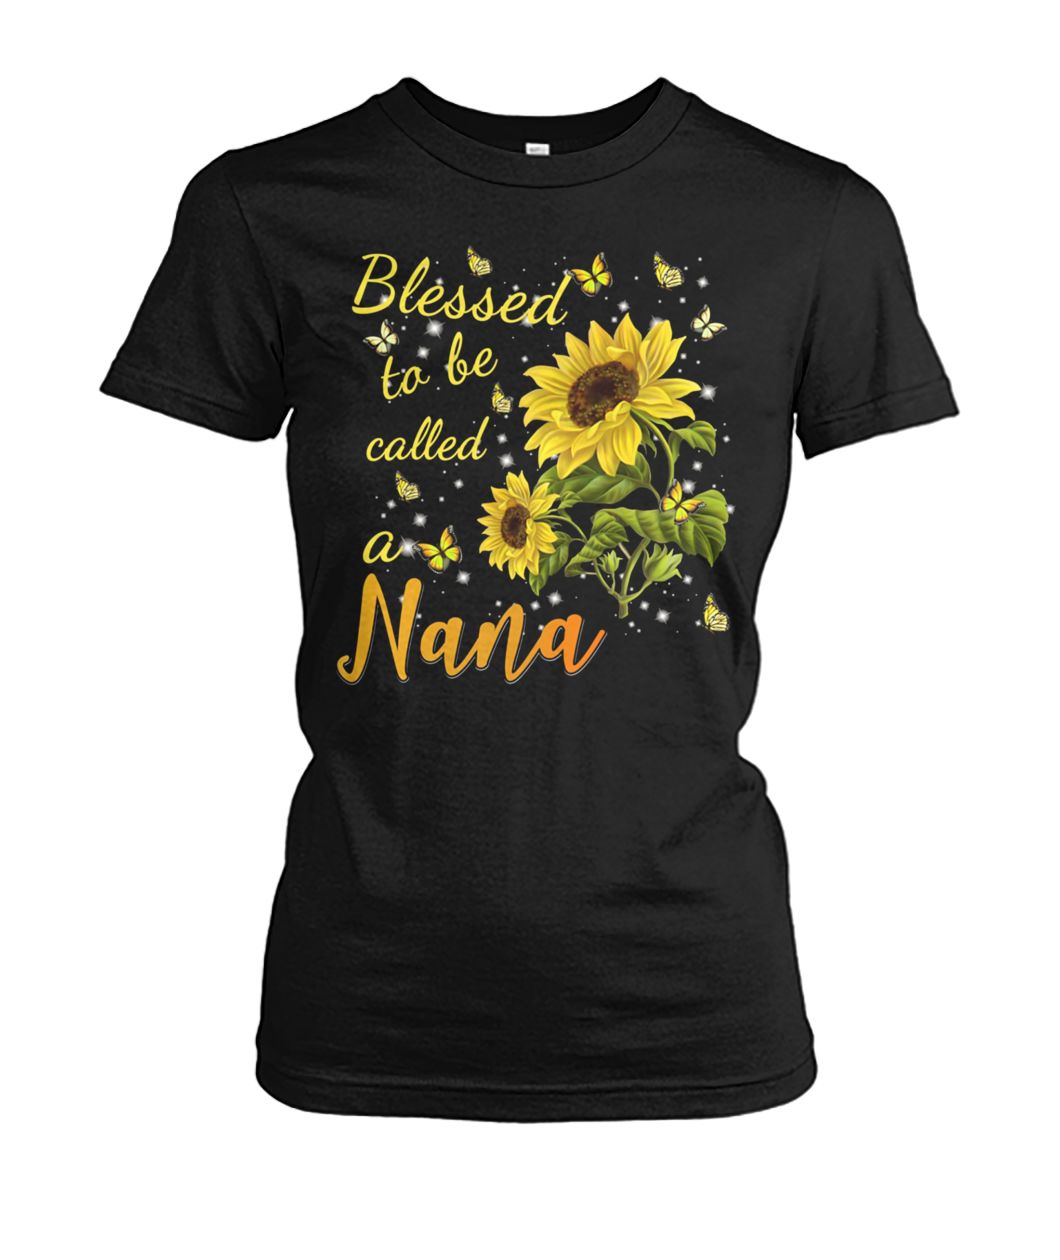 Sunflower blessed to be called a nana women's crew tee